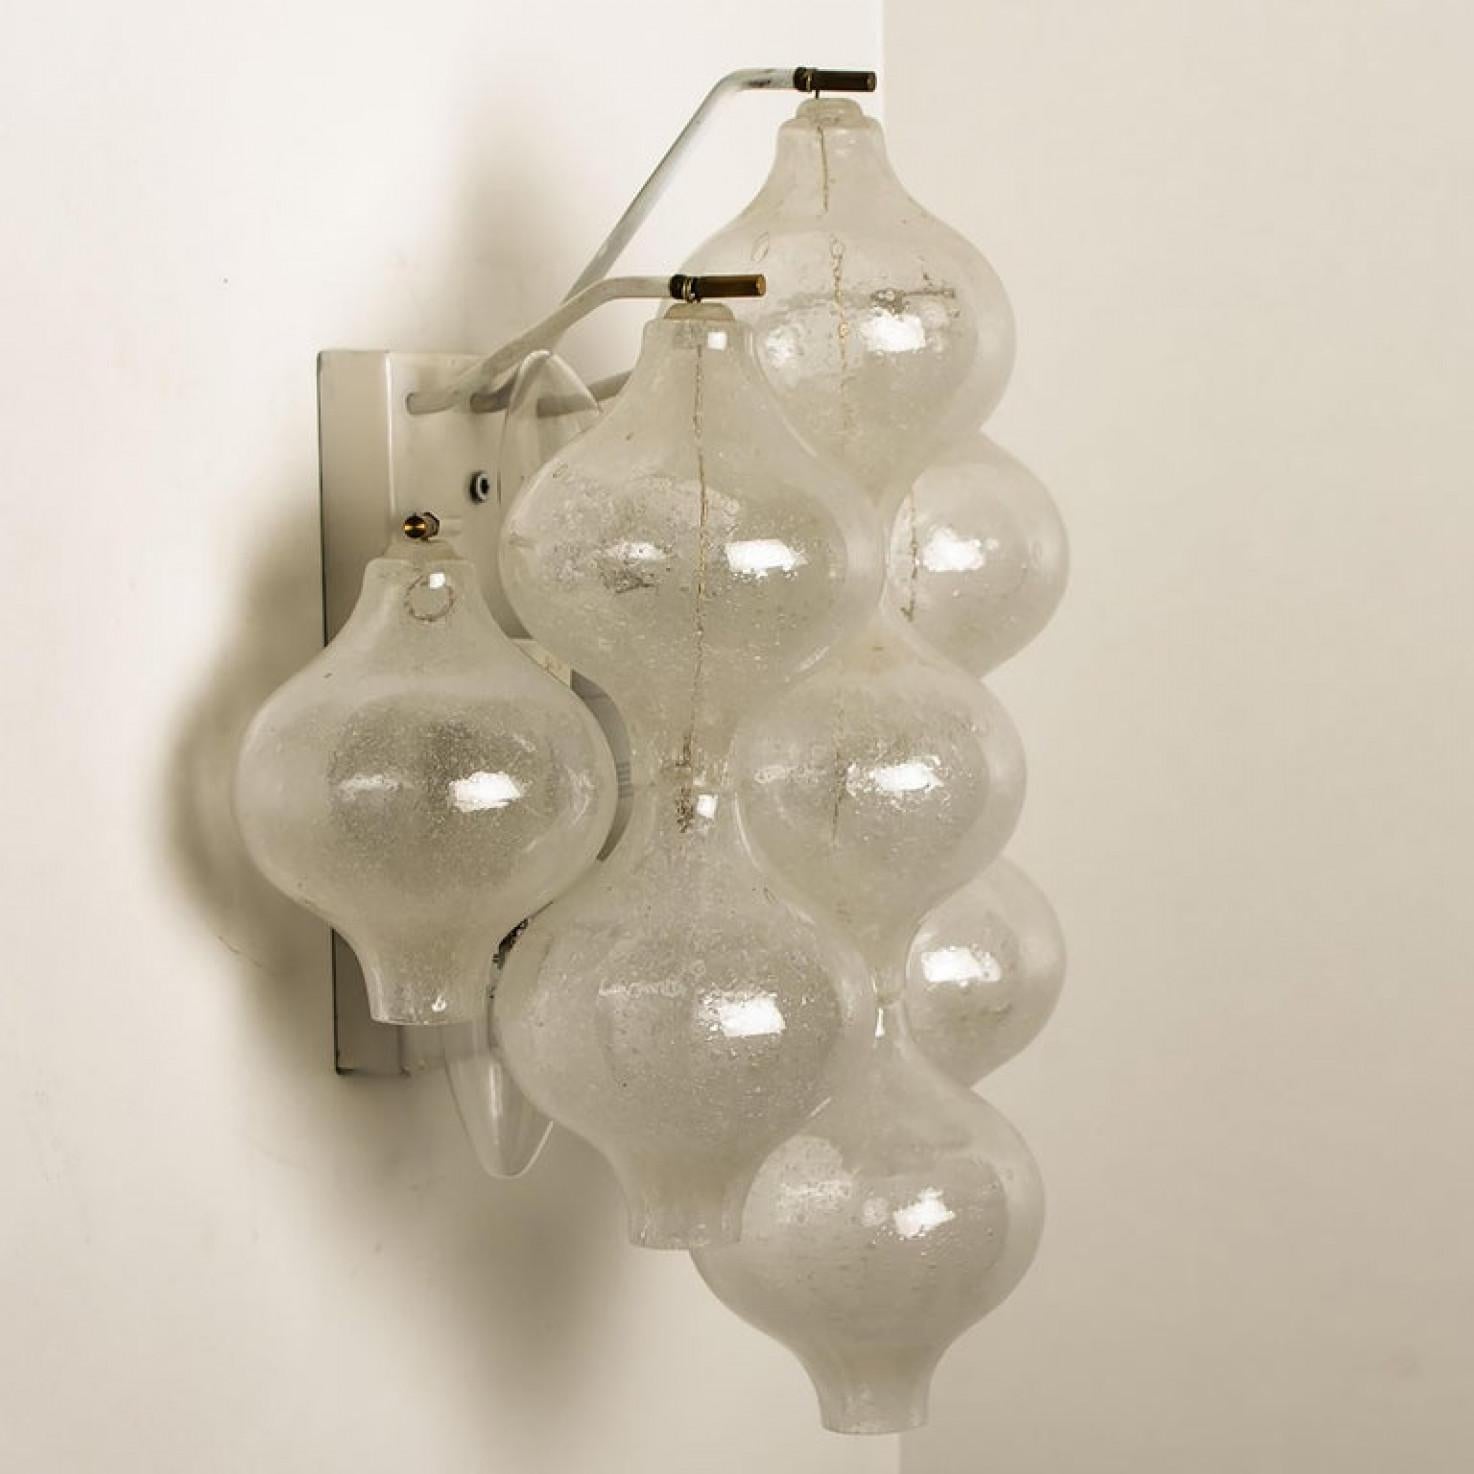 1 of the 8 unique elegant 'Tulipan' glass wall sconces by J.T. Kalmar, Austria, Vienna, manufactured in midcentury, circa 1970 (late 1960s-early 1970s). With tulip shaped hand blown bubble glasses. With a white enameled metal frame which holds 9